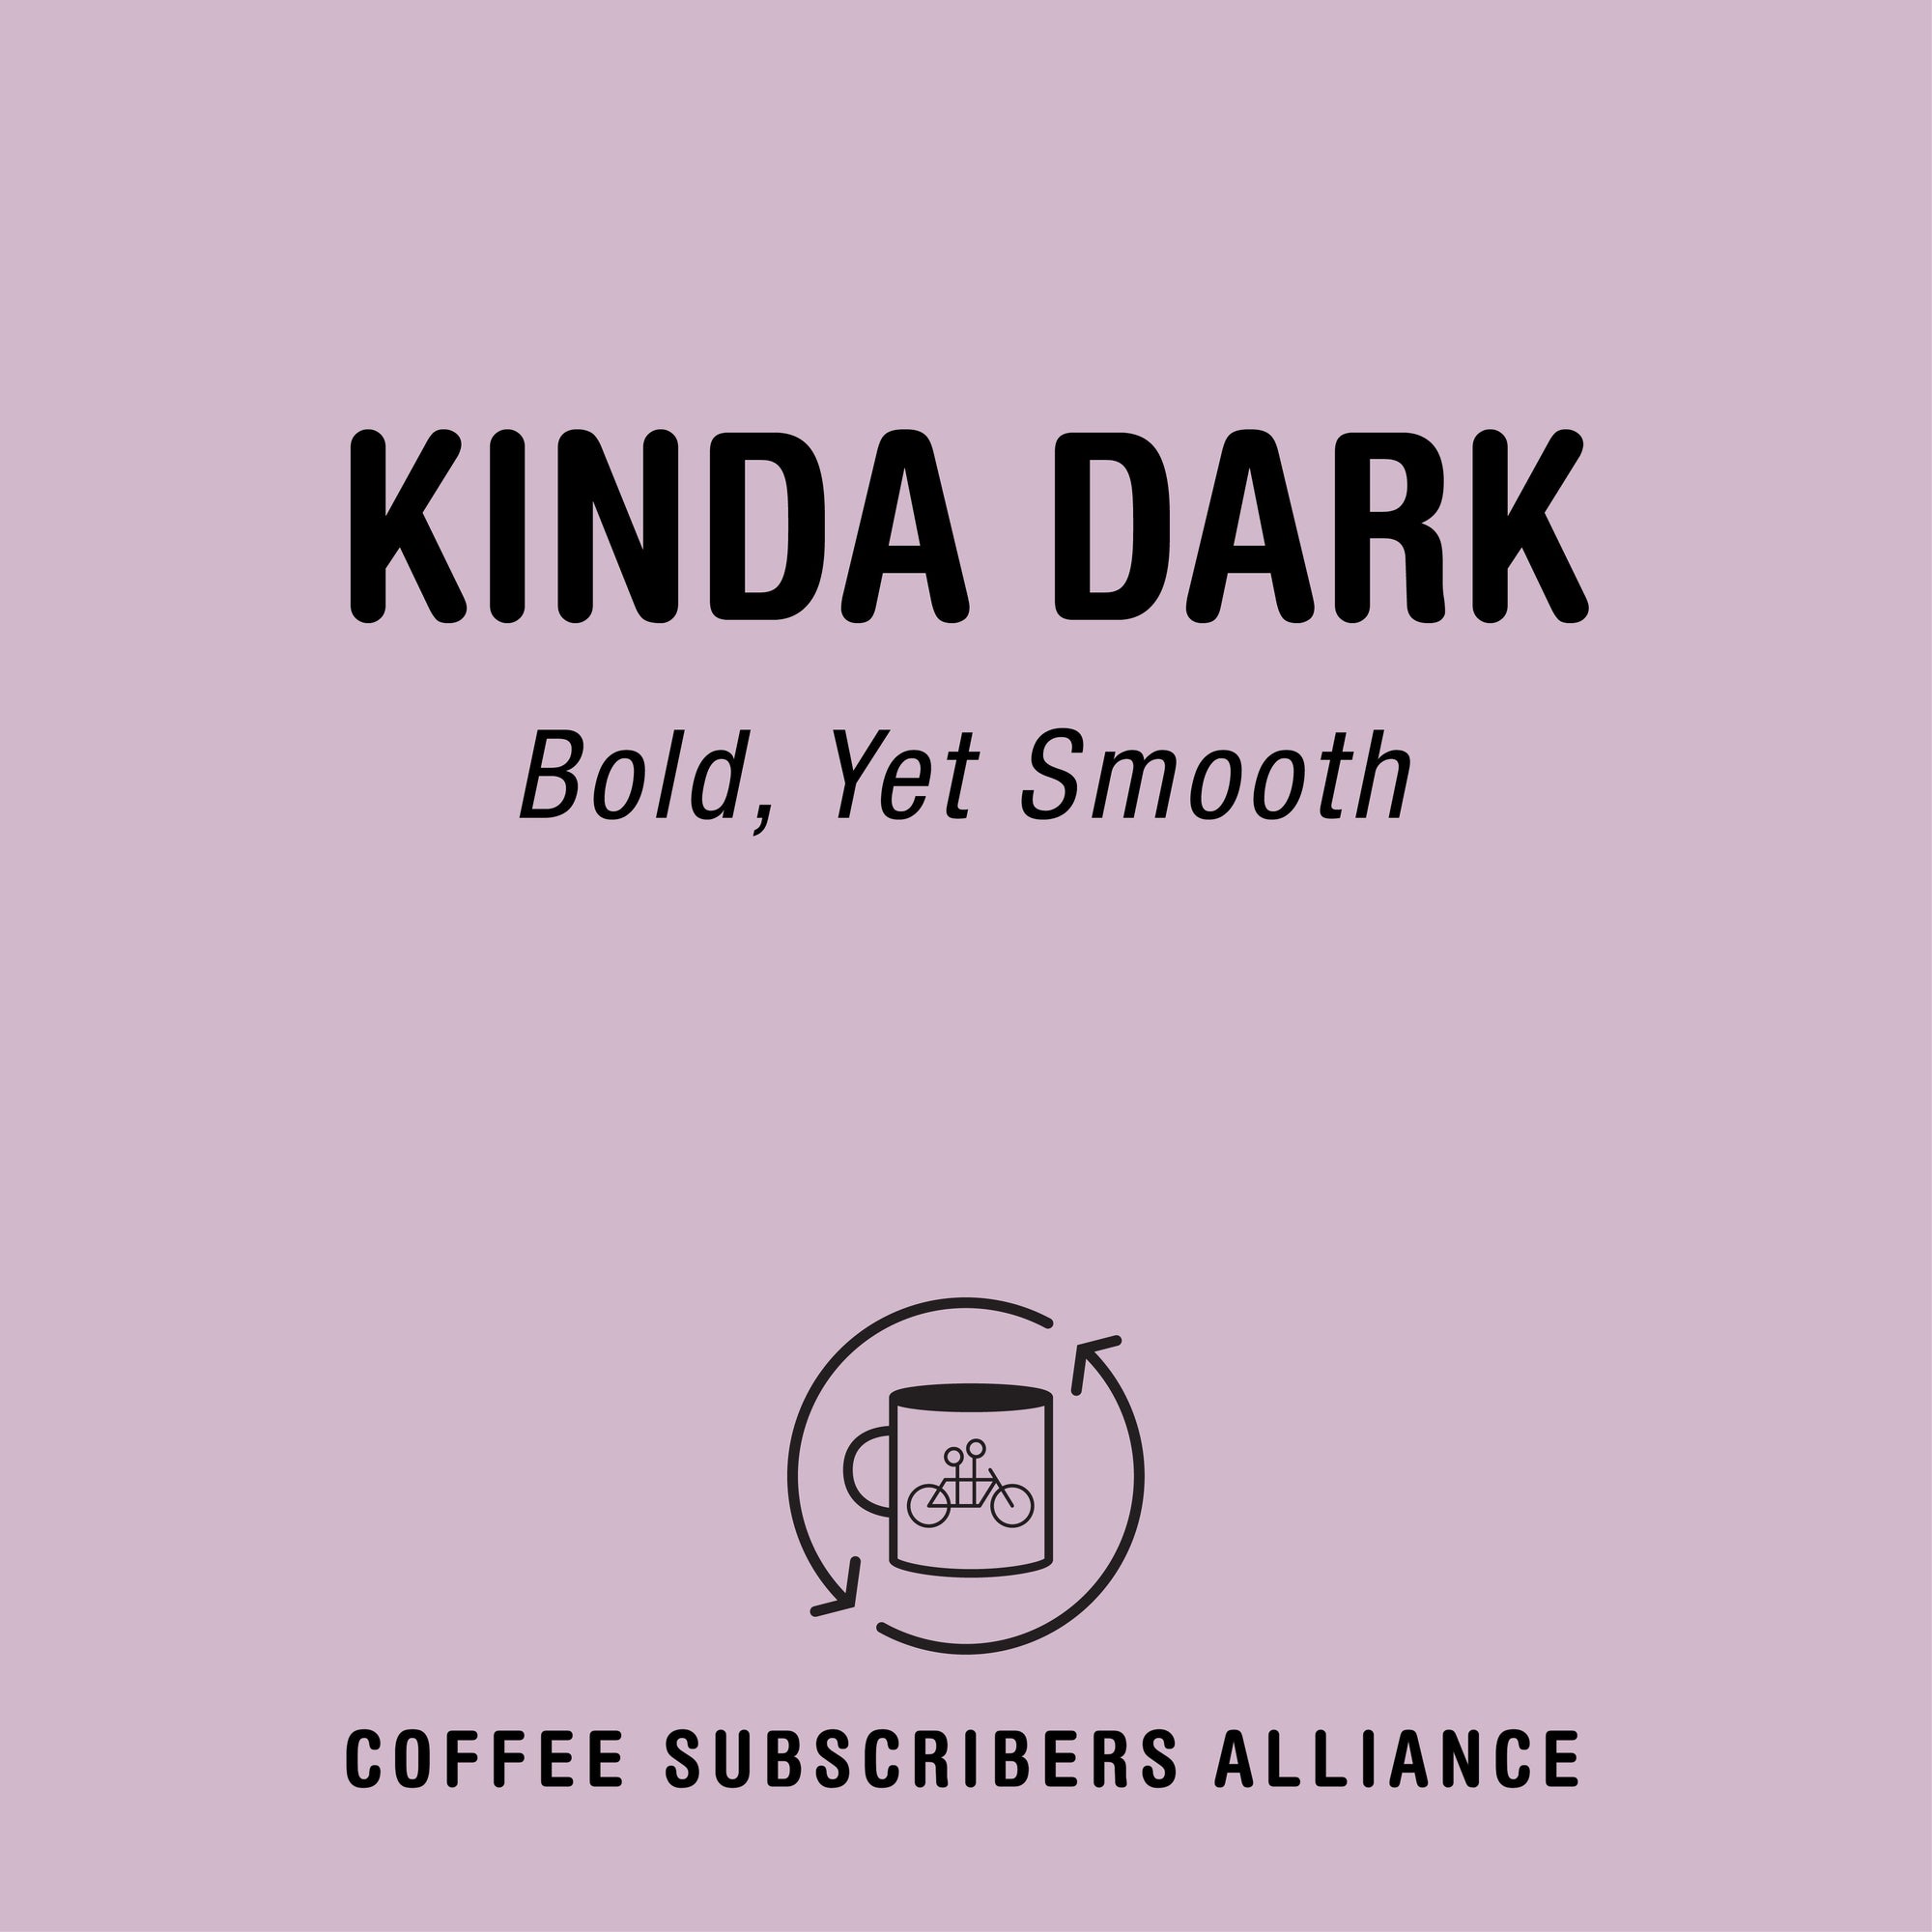 Graphic featuring the text "Kinda Dark Subscription Gift - 4 Weeks x 12" with a logo of a coffee cup below, labeled "Tandem Coffee Subscribers Alliance" on a plain pink background.